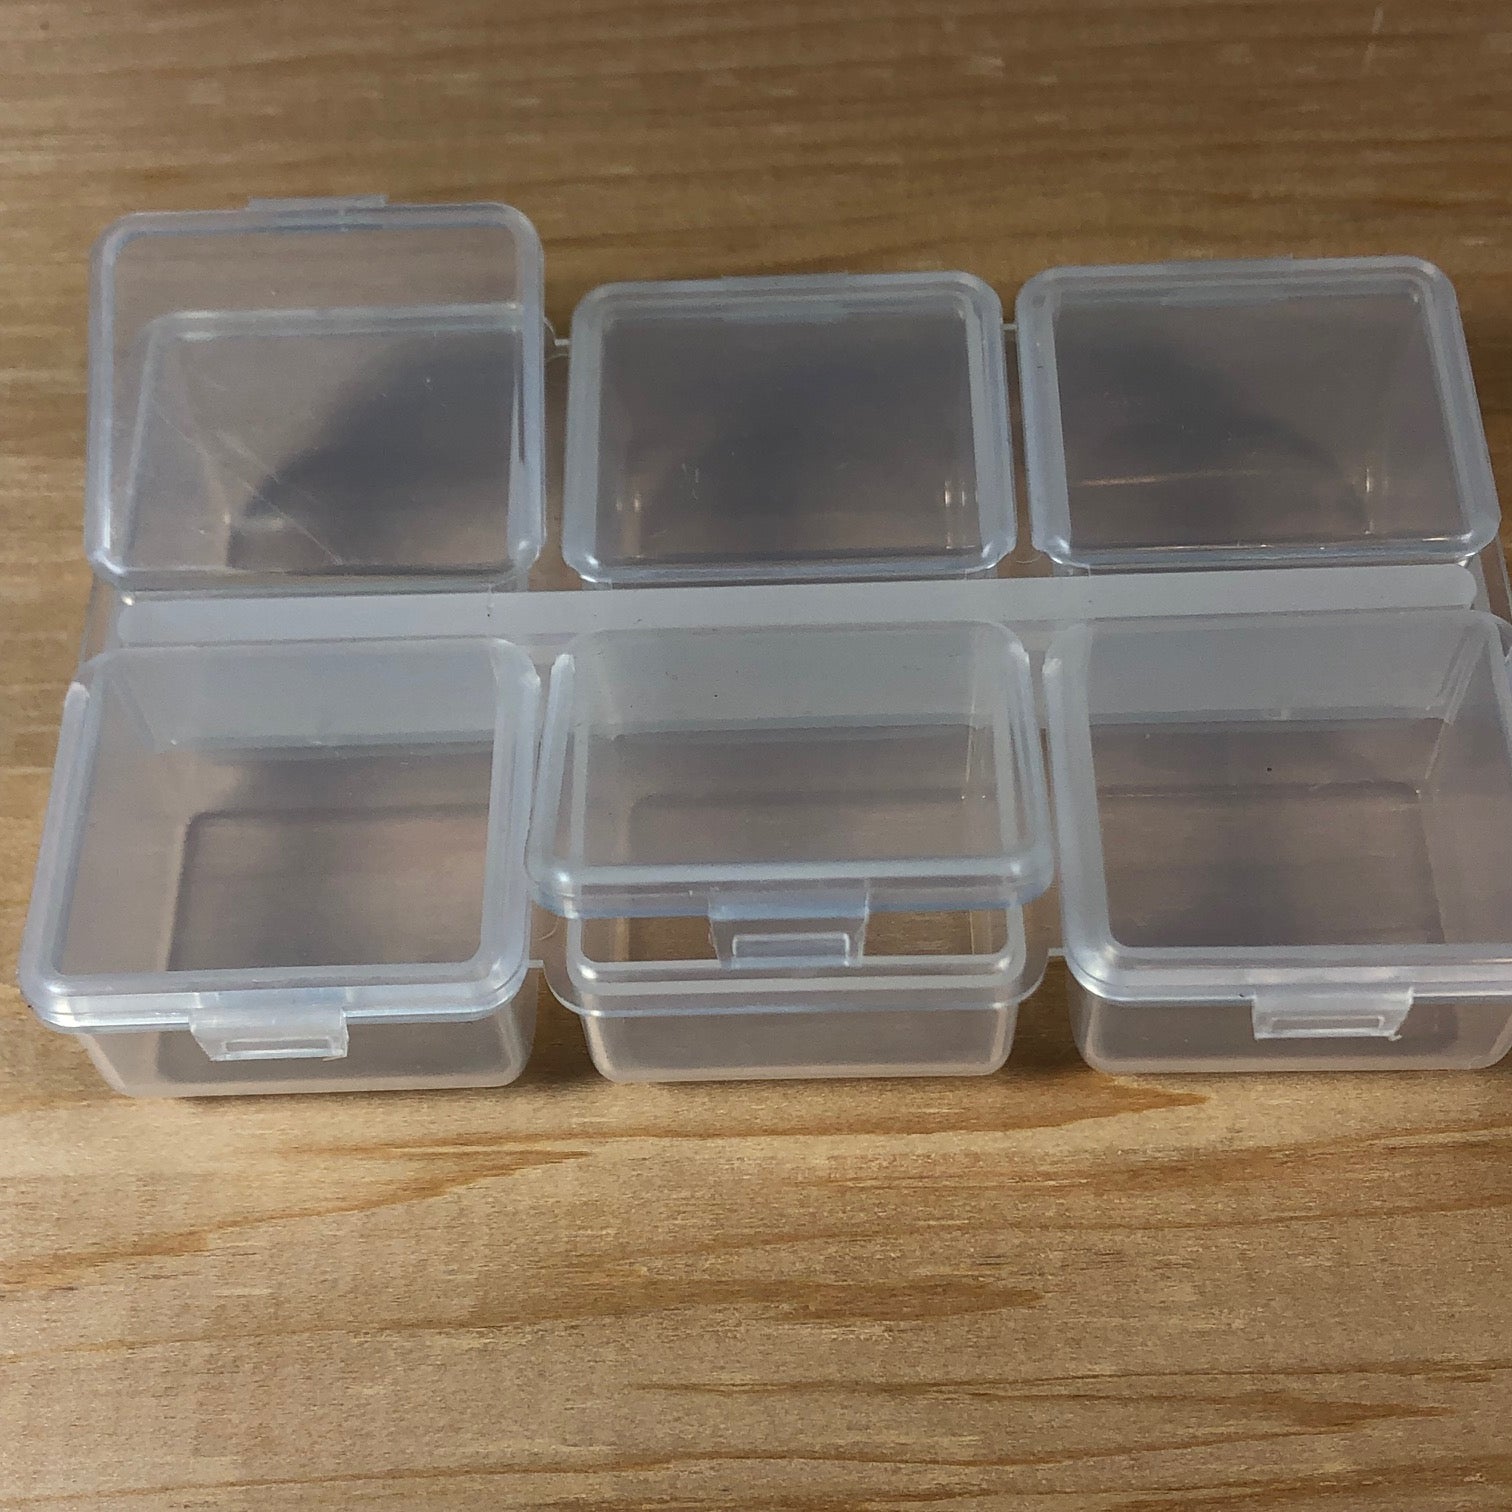 Meiho Adjustable Compartment Fly Box - Case F (M30) - Wilkinson